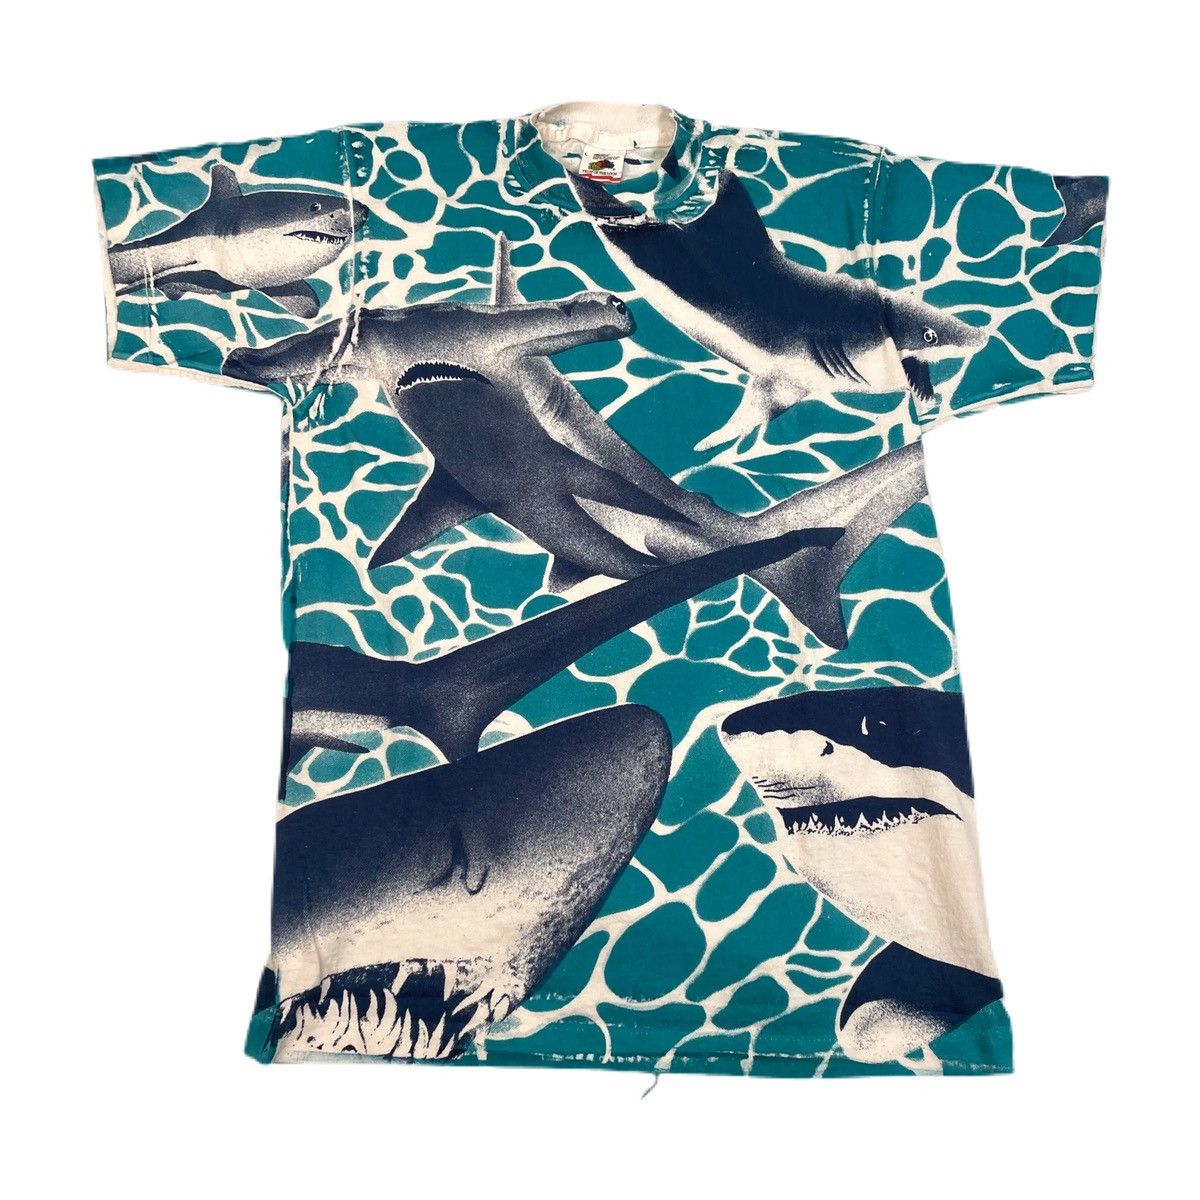 Vintage Shark species all over print single stitch graphic t-shirt Size US S / EU 44-46 / 1 - 1 Preview